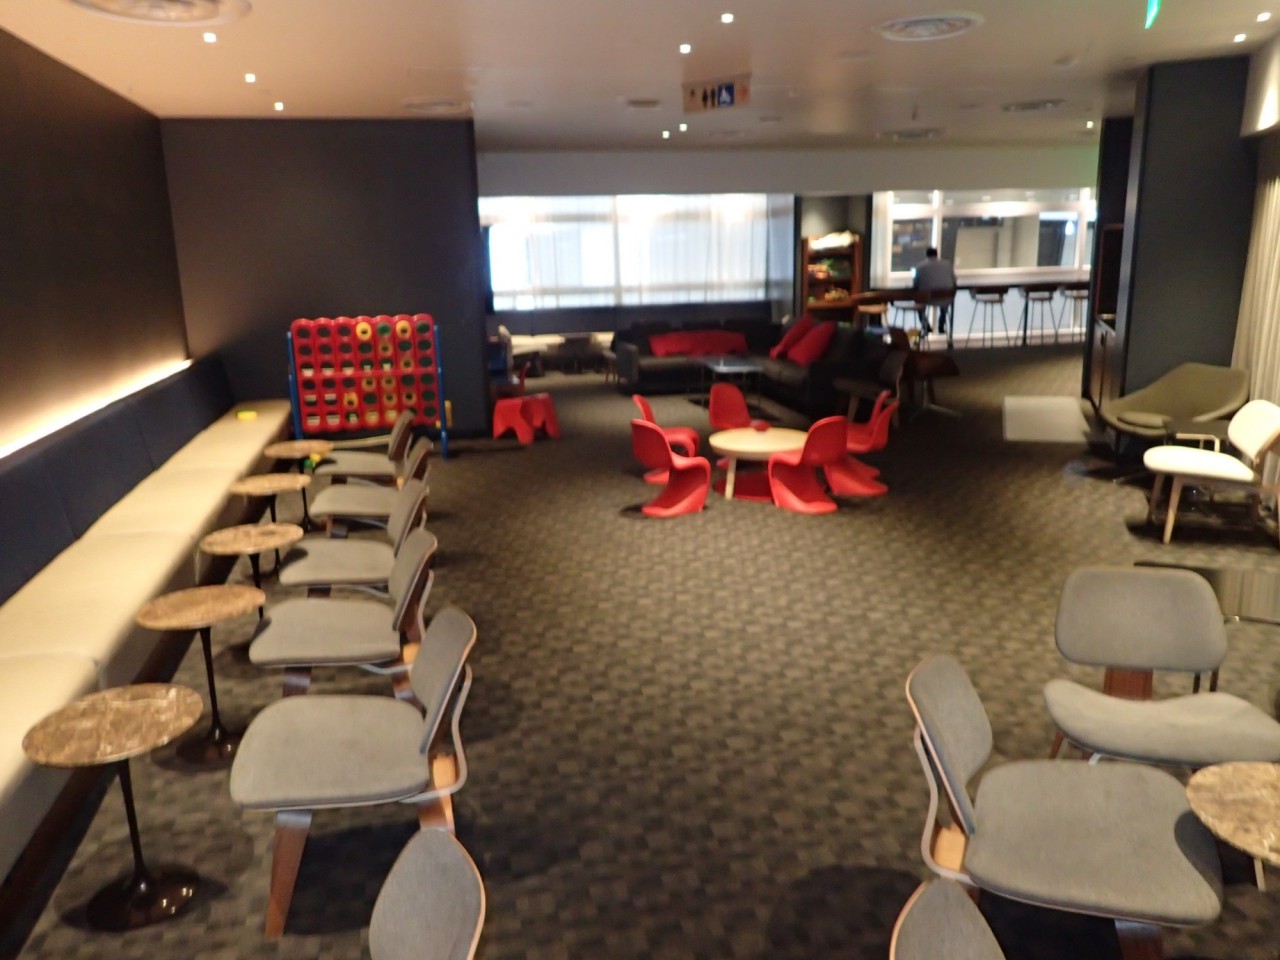 Kids' Play Room Seating, Oneworld Lounge LAX TBIT Review